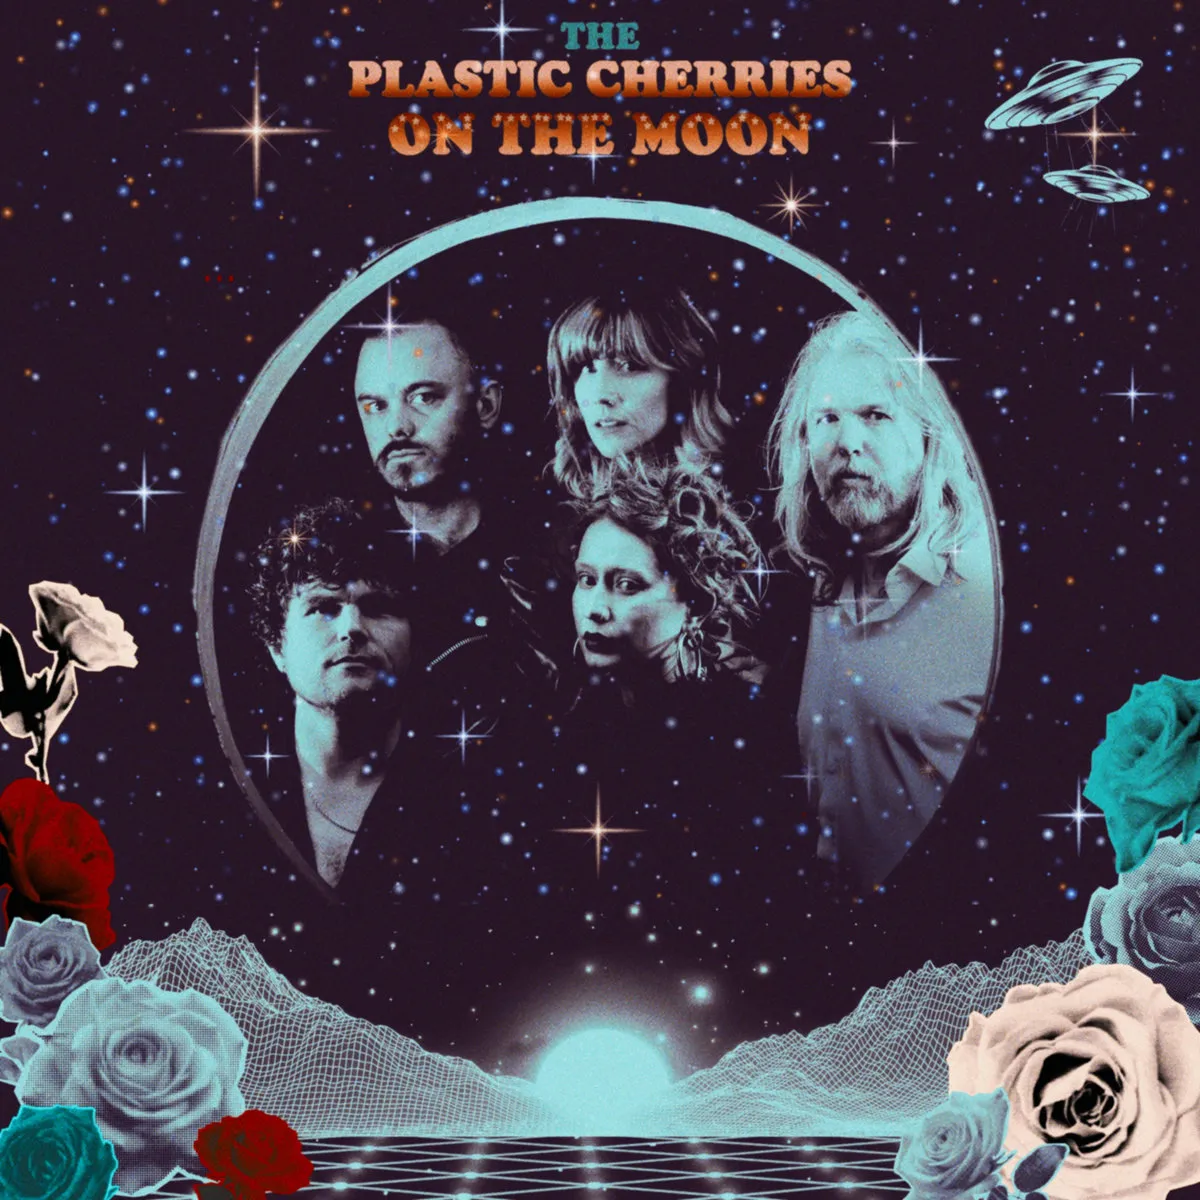 The album cover for Plastic Cherries on the Moon.